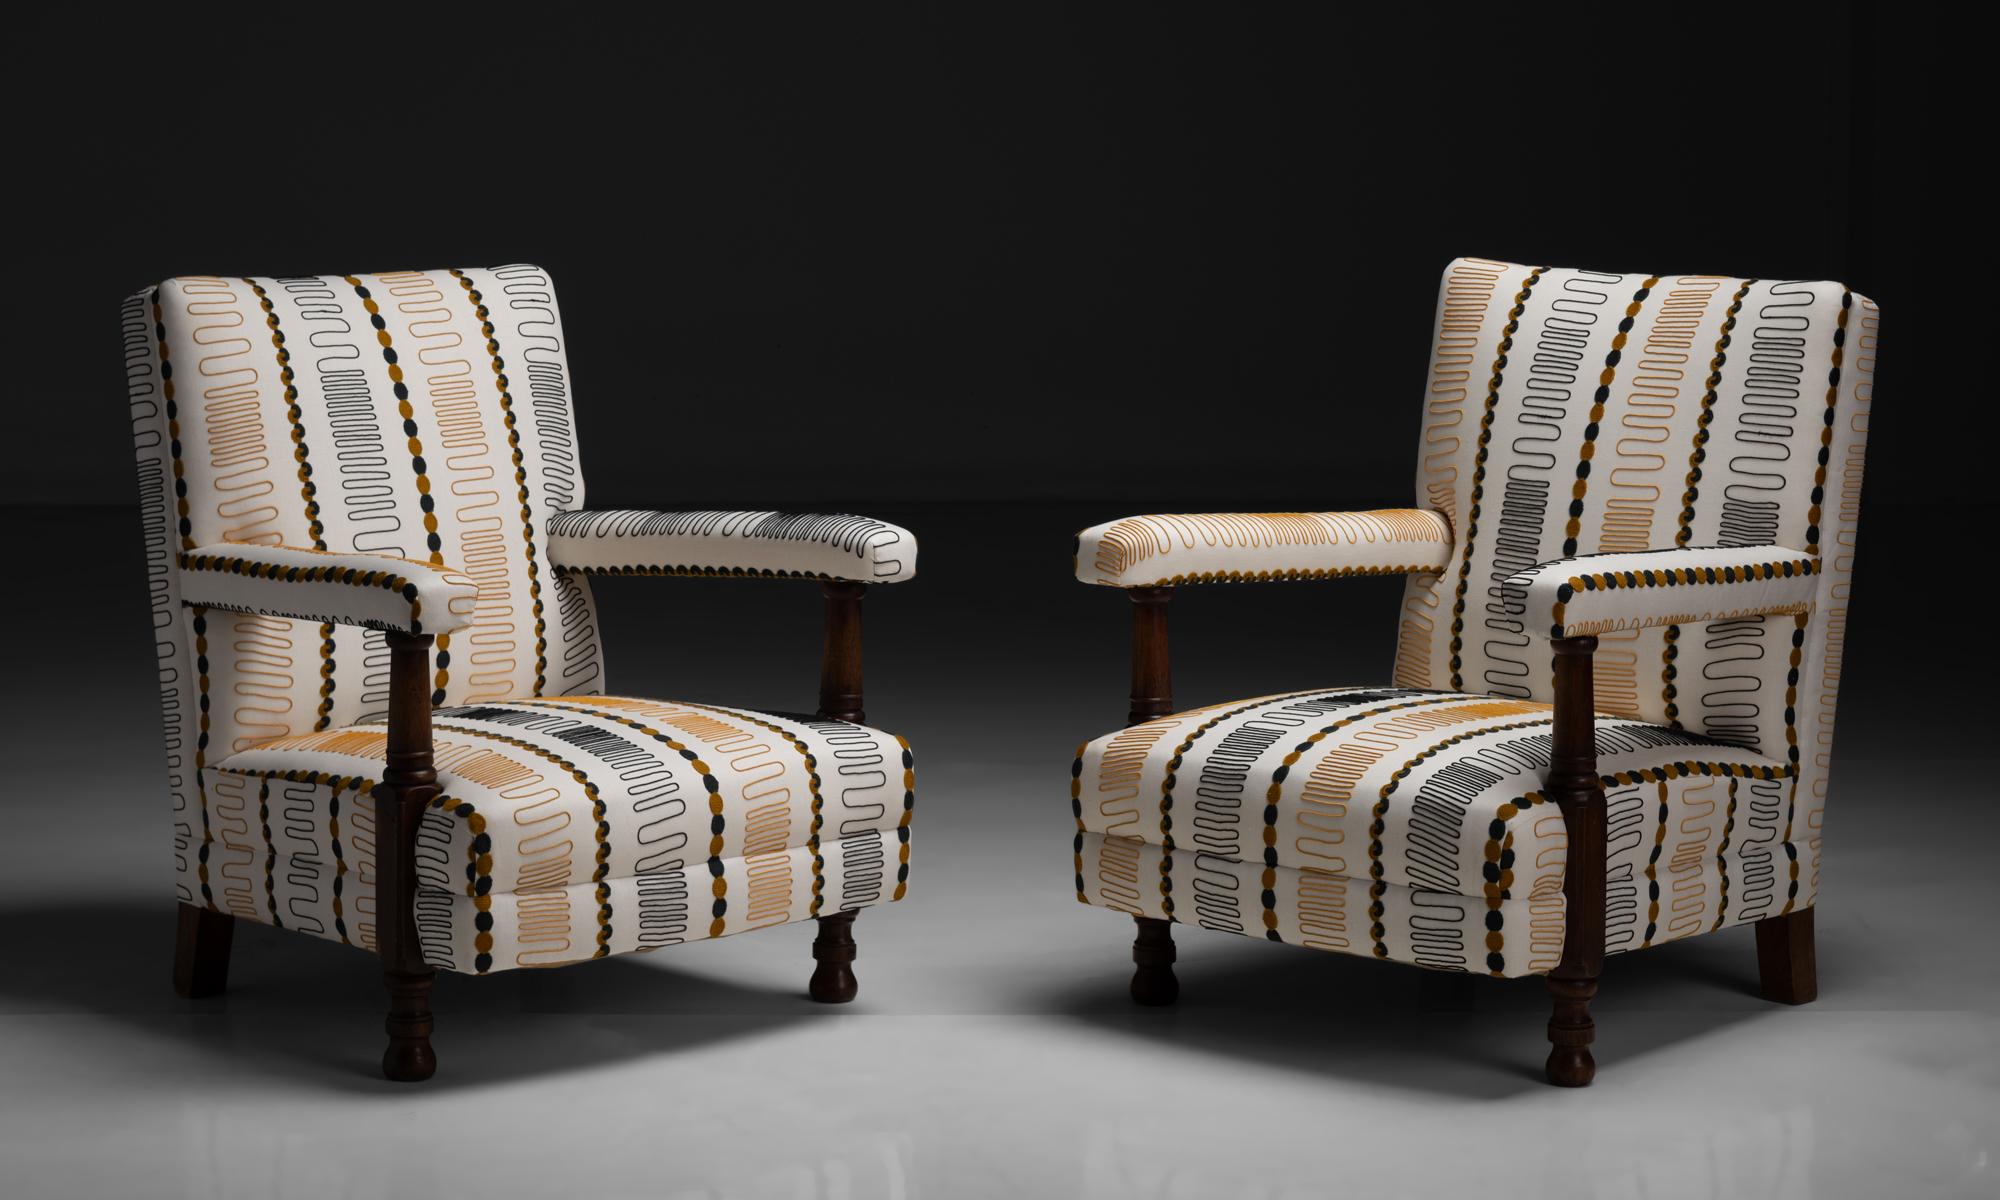 Library Chairs in Embroidered Linen by Pierre Frey

England circa 1900

Antique oak frame and newly upholstered in embroidered linen by Pierre Frey.

Measures 30.5”w x 29”d x 35”h x 15”seat